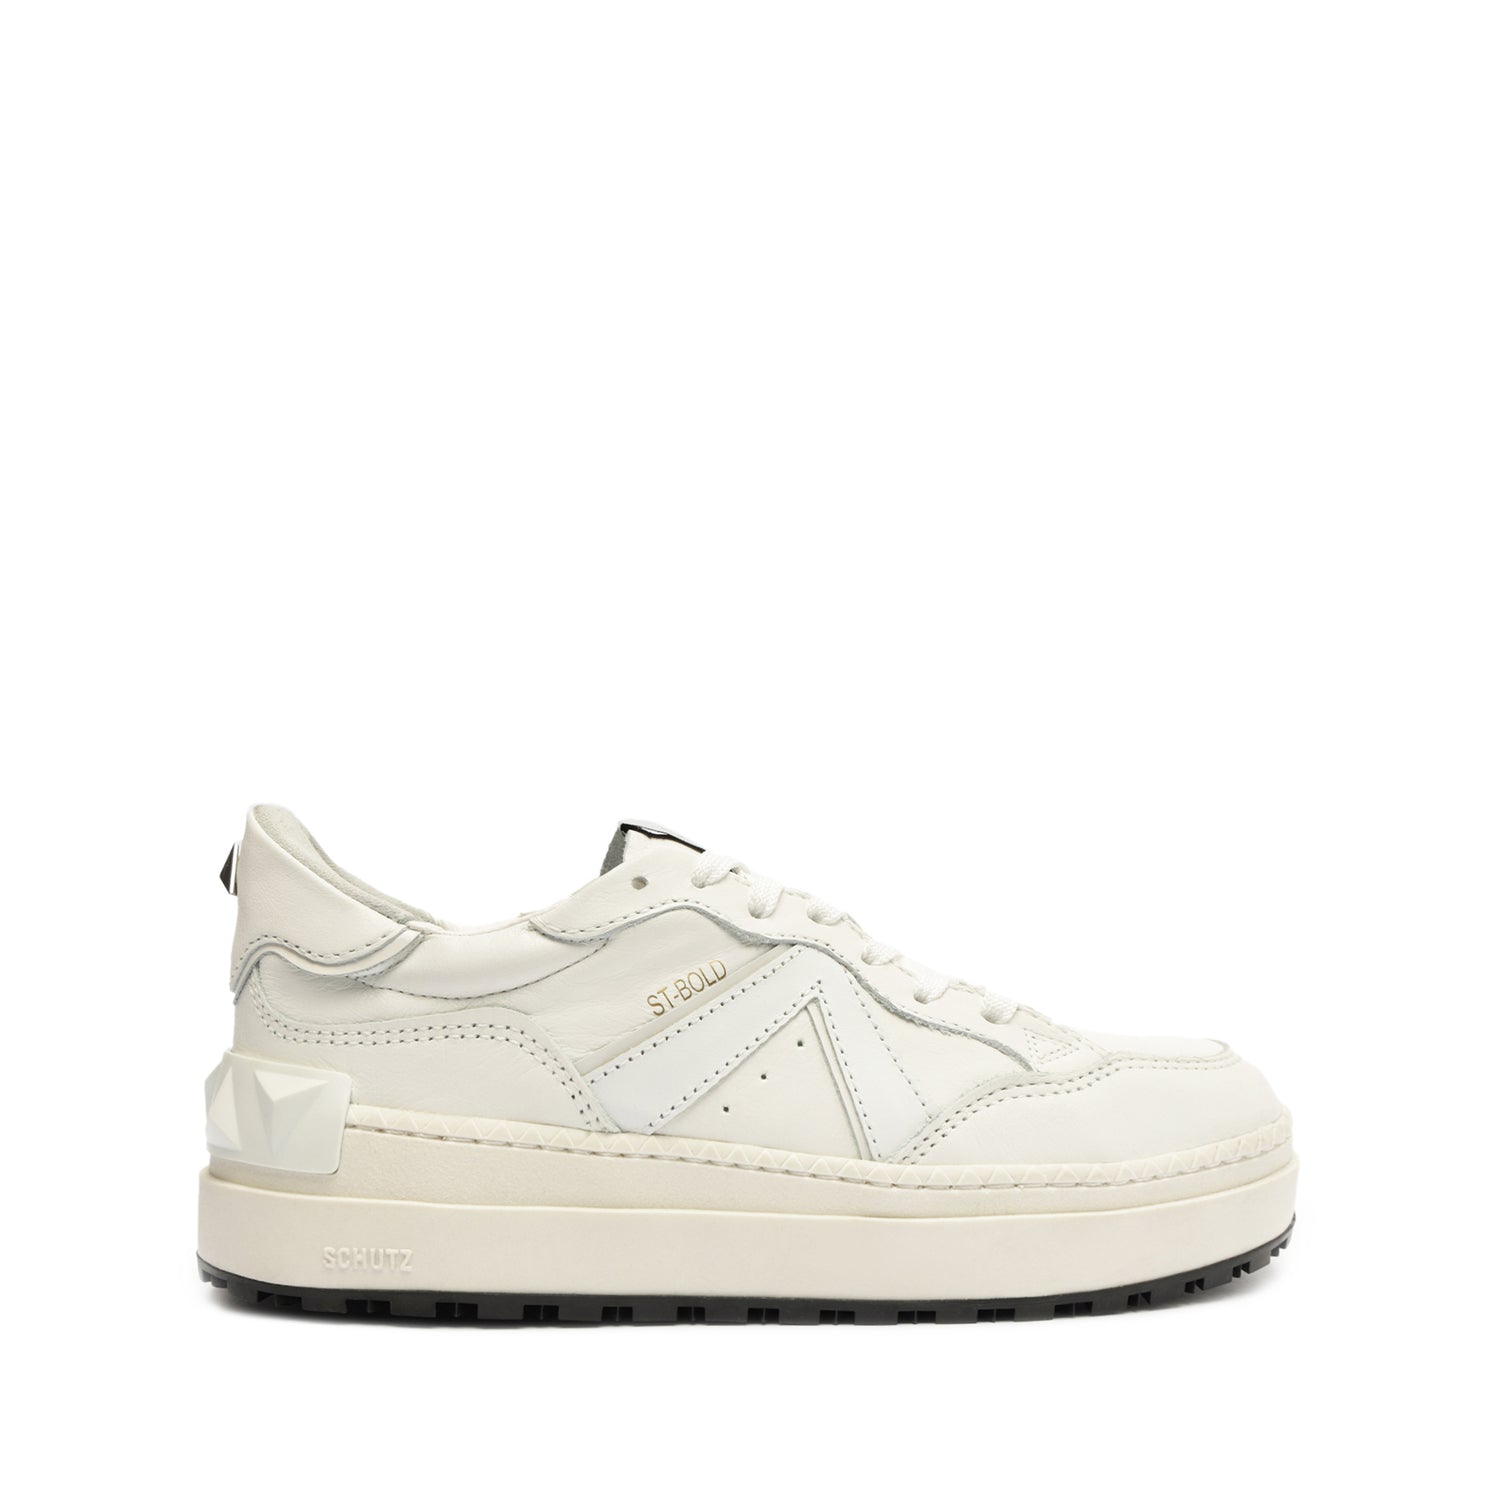 ST-BOLD Leather Sneaker Sneakers CO 5 White Calf Leather - Schutz Shoes